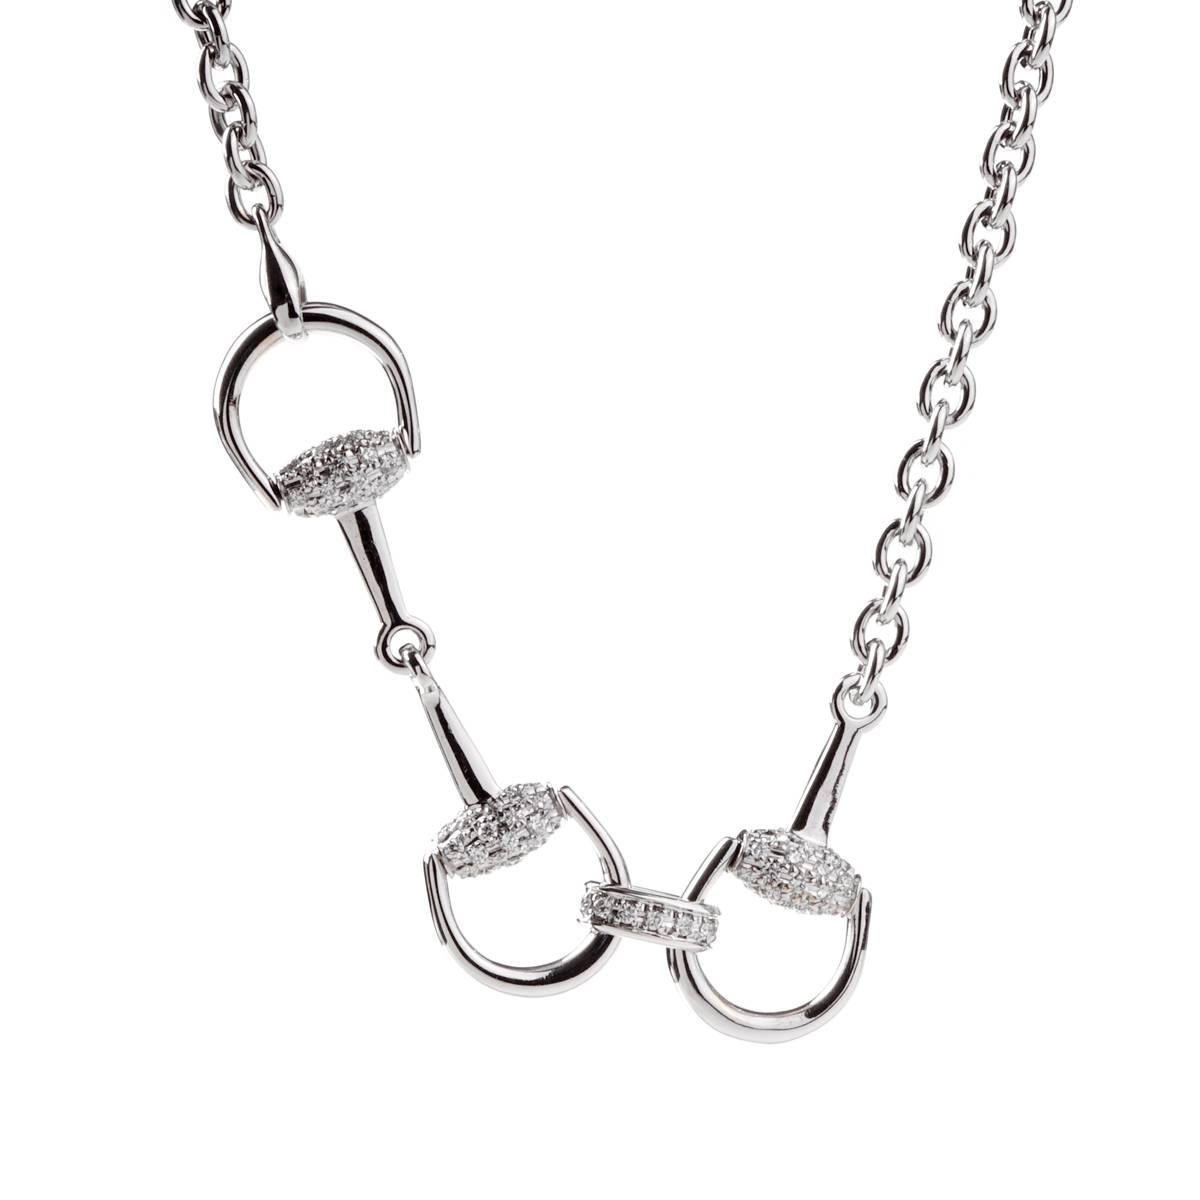 A magnificent Gucci necklace featuring the iconic Horsebit motif in 18k white gold, this fabulous necklace measures 36